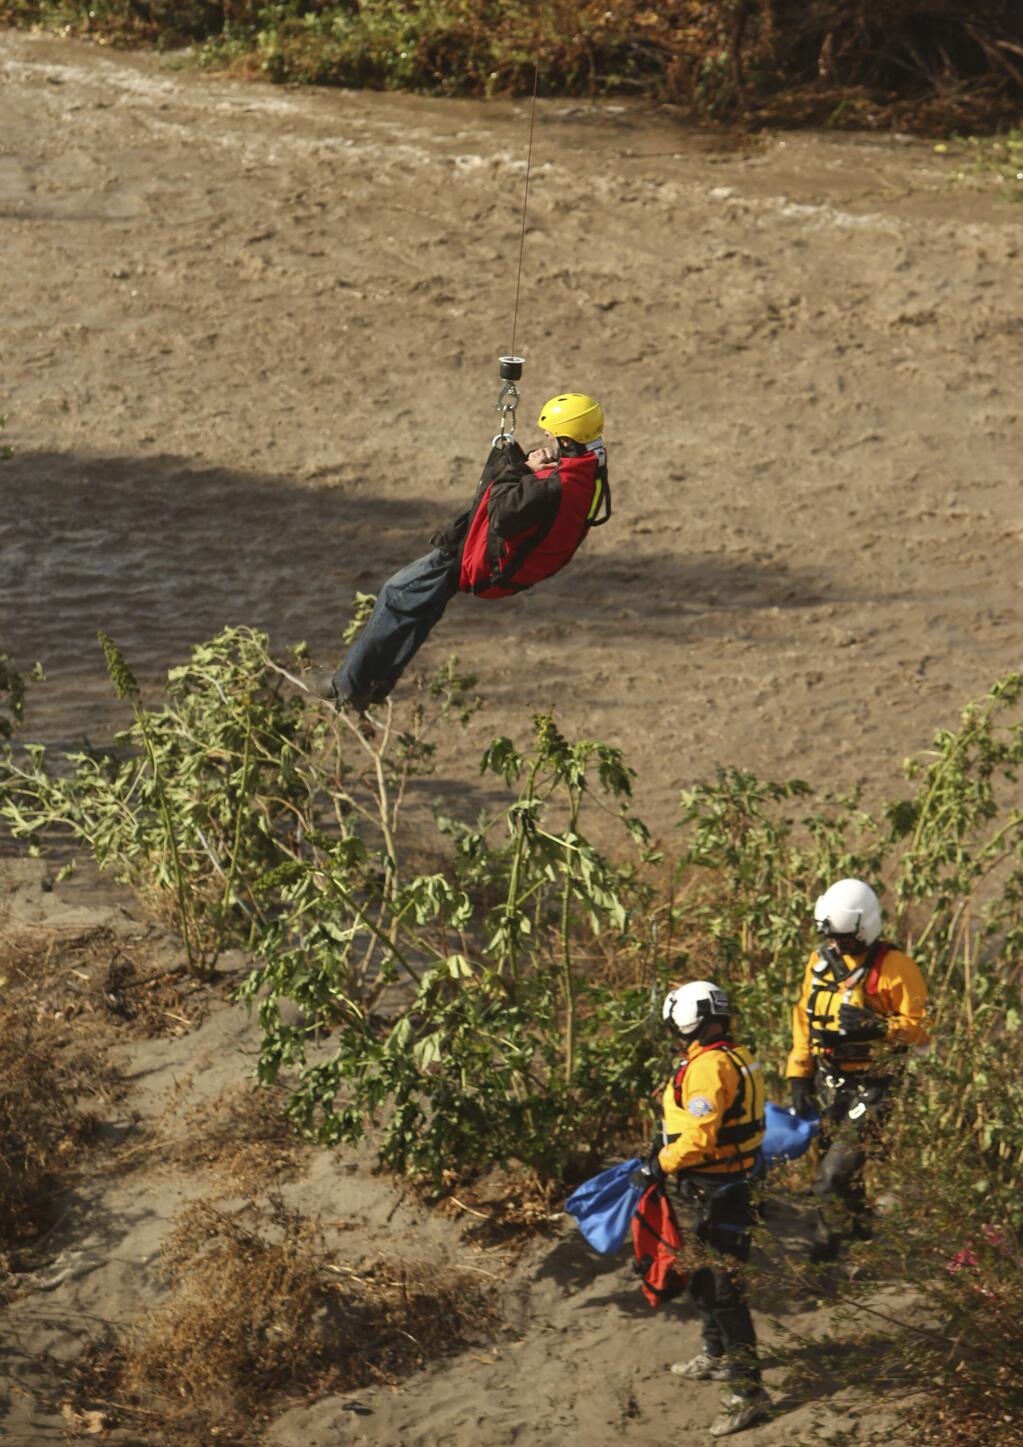 A man is hoisted out with the help of a San Bernardino County Sheriff's helicopter on Tuesday, Jan. 9, 2018, in the Santa Ana River and near the borders of Rialto, Colton, and Riverside, Calif. Three people and a dog were rescued by a helicopter after large amounts of rain fell, trapping the group at a homeless encampment in the river. (Stan Lim/Los Angeles Daily News via AP)